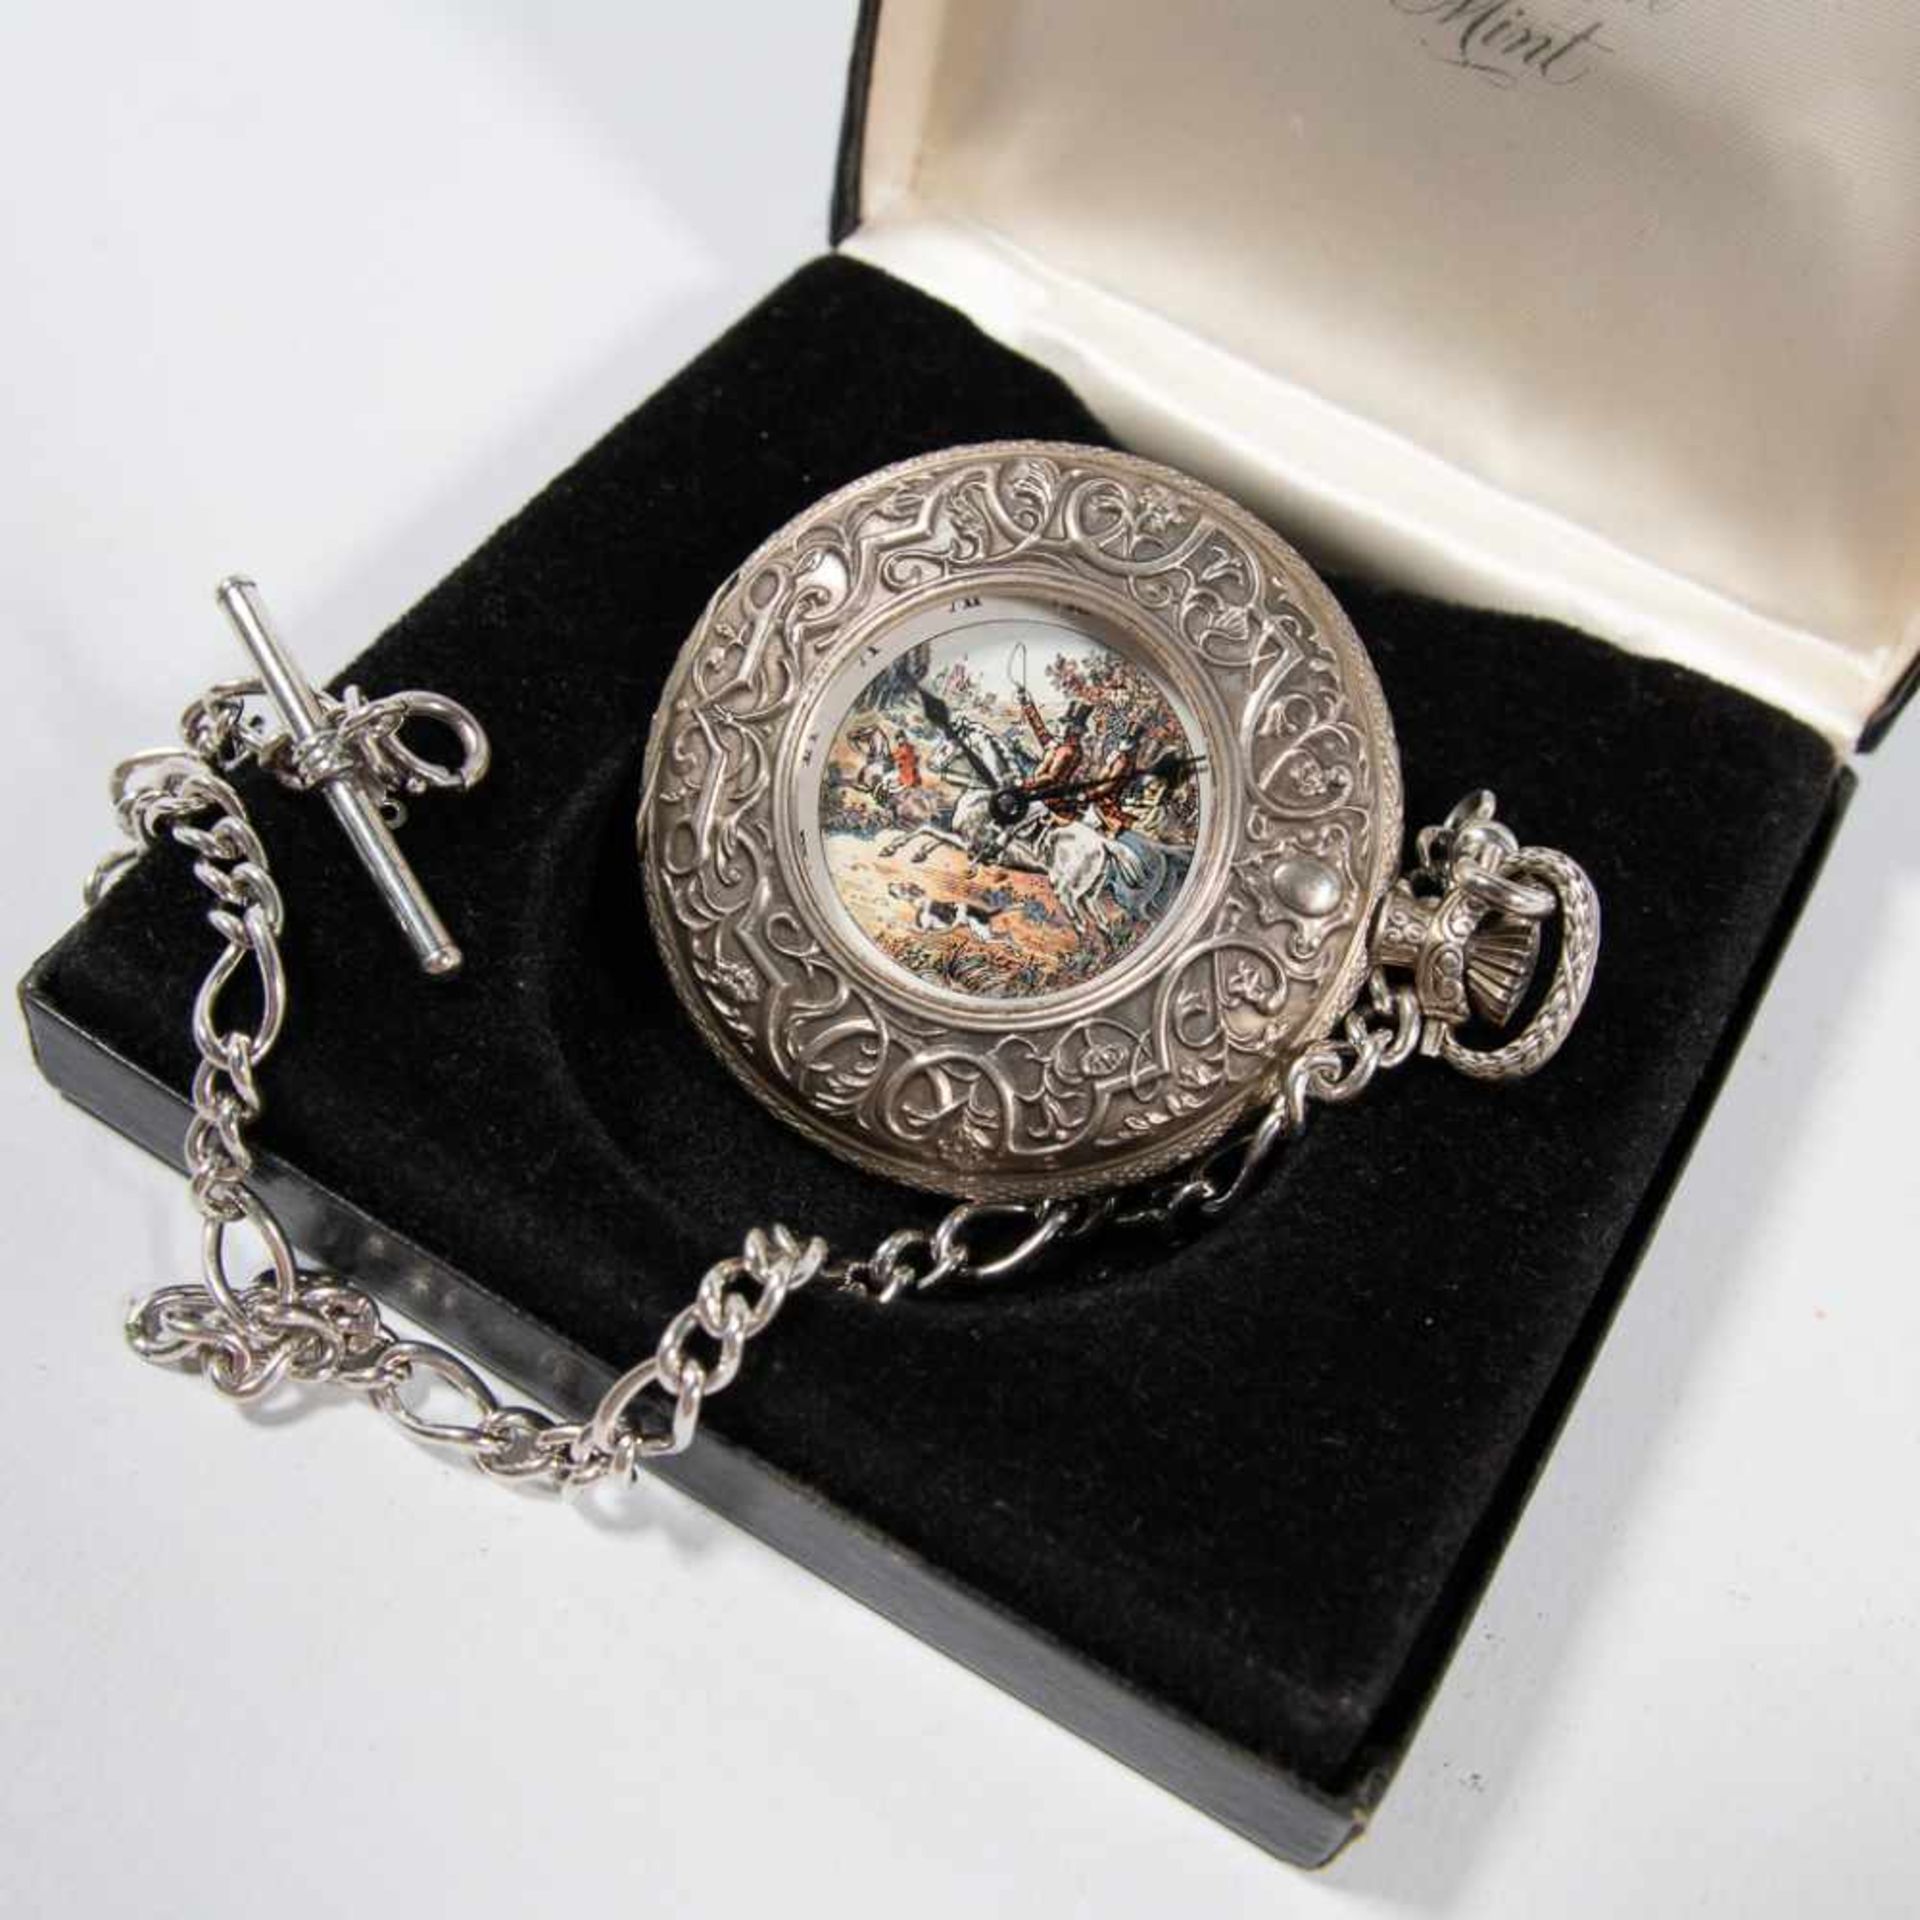 Alfex Pocket Watch - Image 3 of 6